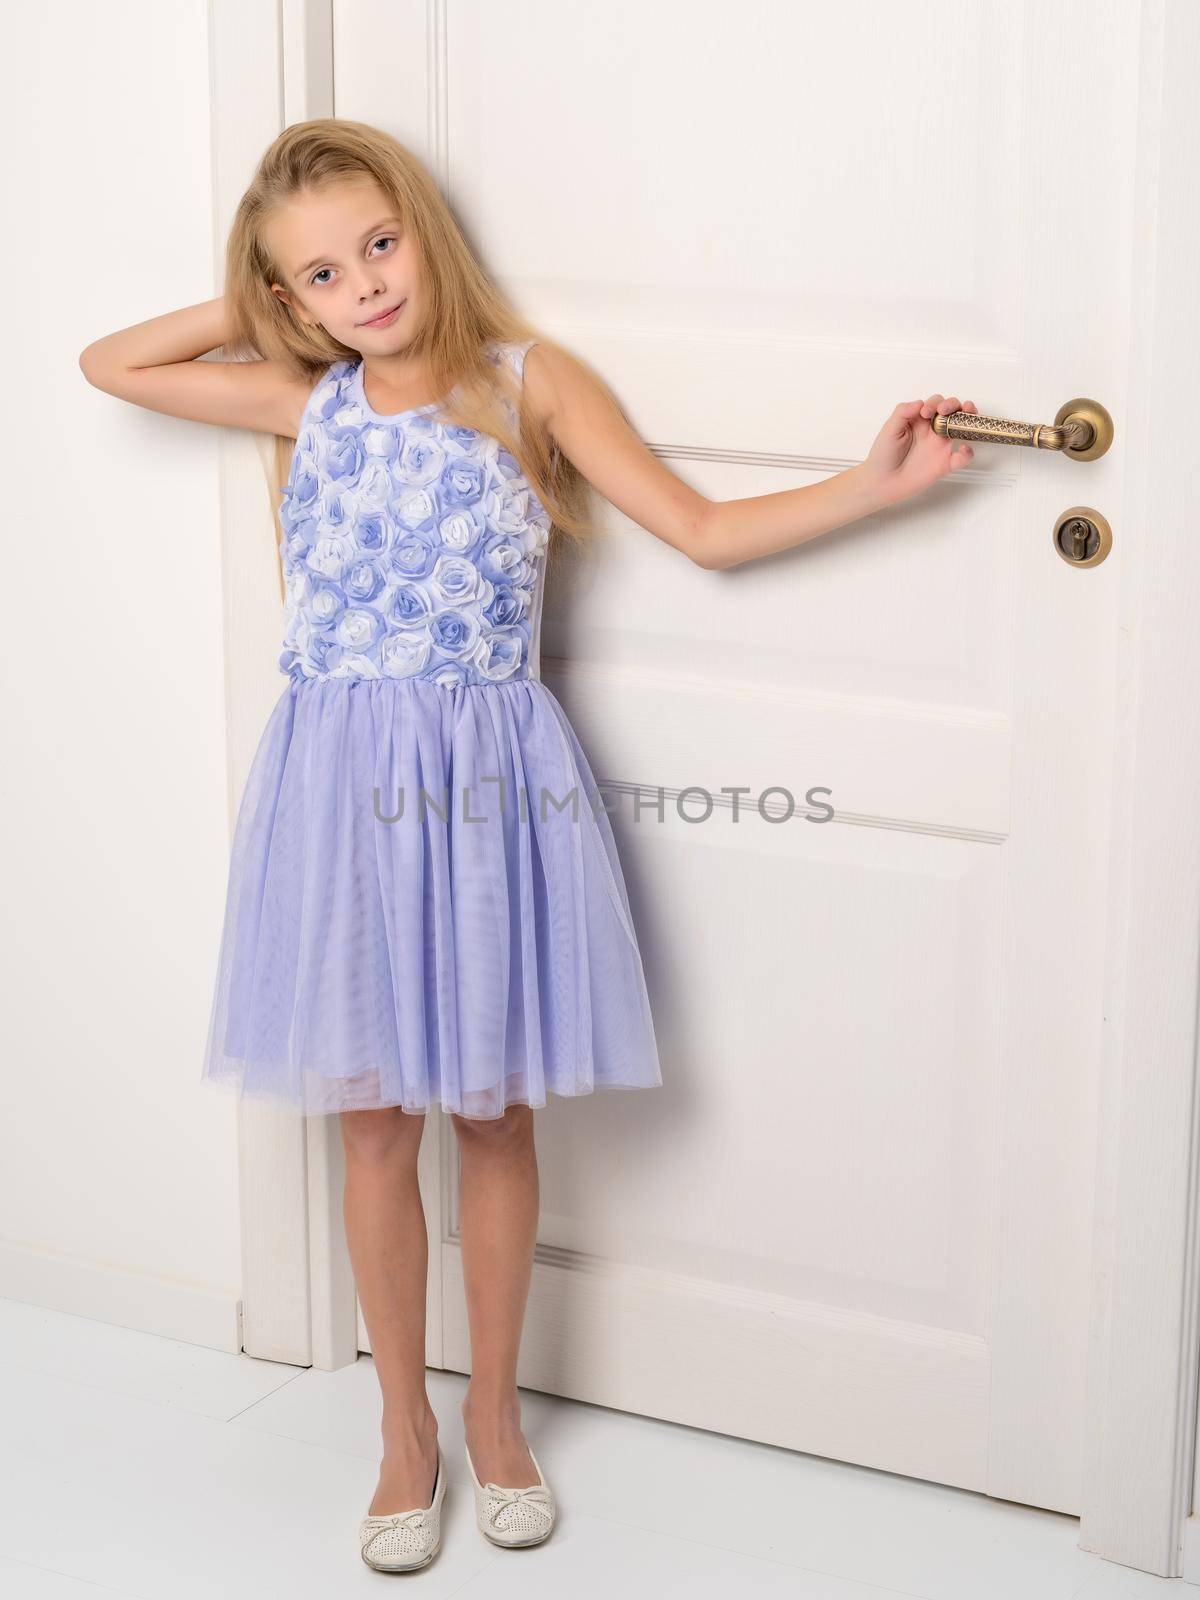 A nice little girl is standing by the door. The concept of family happiness and a home.